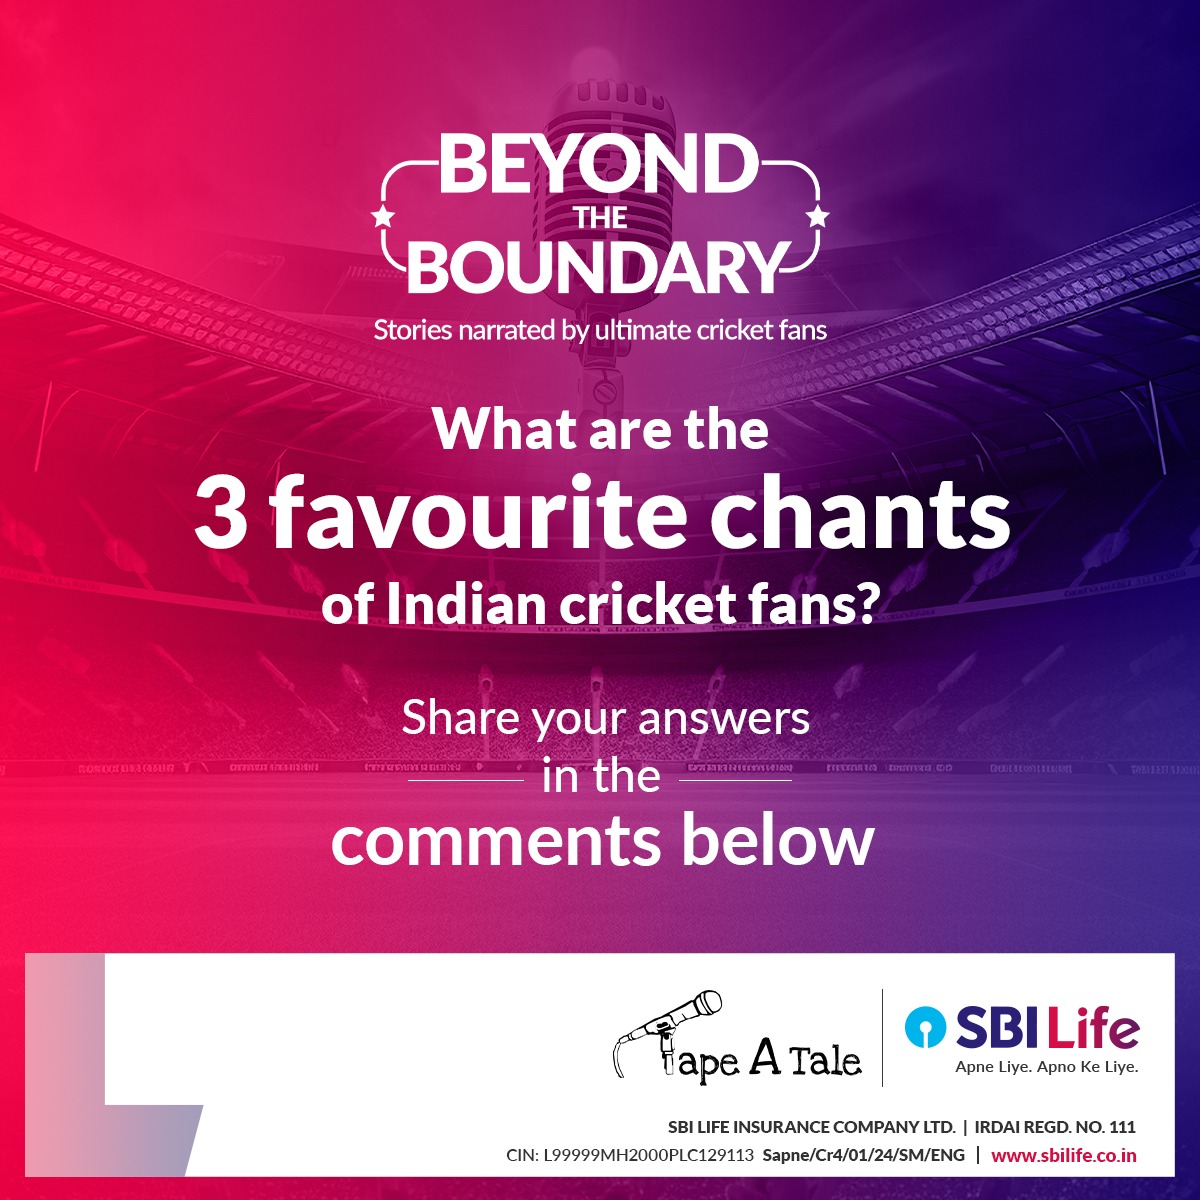 The clock is ticking ⏳3 days until we get to see you at #BeyondTheBoundary! 

Visit bit.ly/3uDIYQP to book your seat

@tapeAtale  #tat #Storytelling #SpokenWord #CricketTales #CricketStories #SportsNarratives #CricketCommunity  #SBILife #ApneLiyeApnoKeLiye